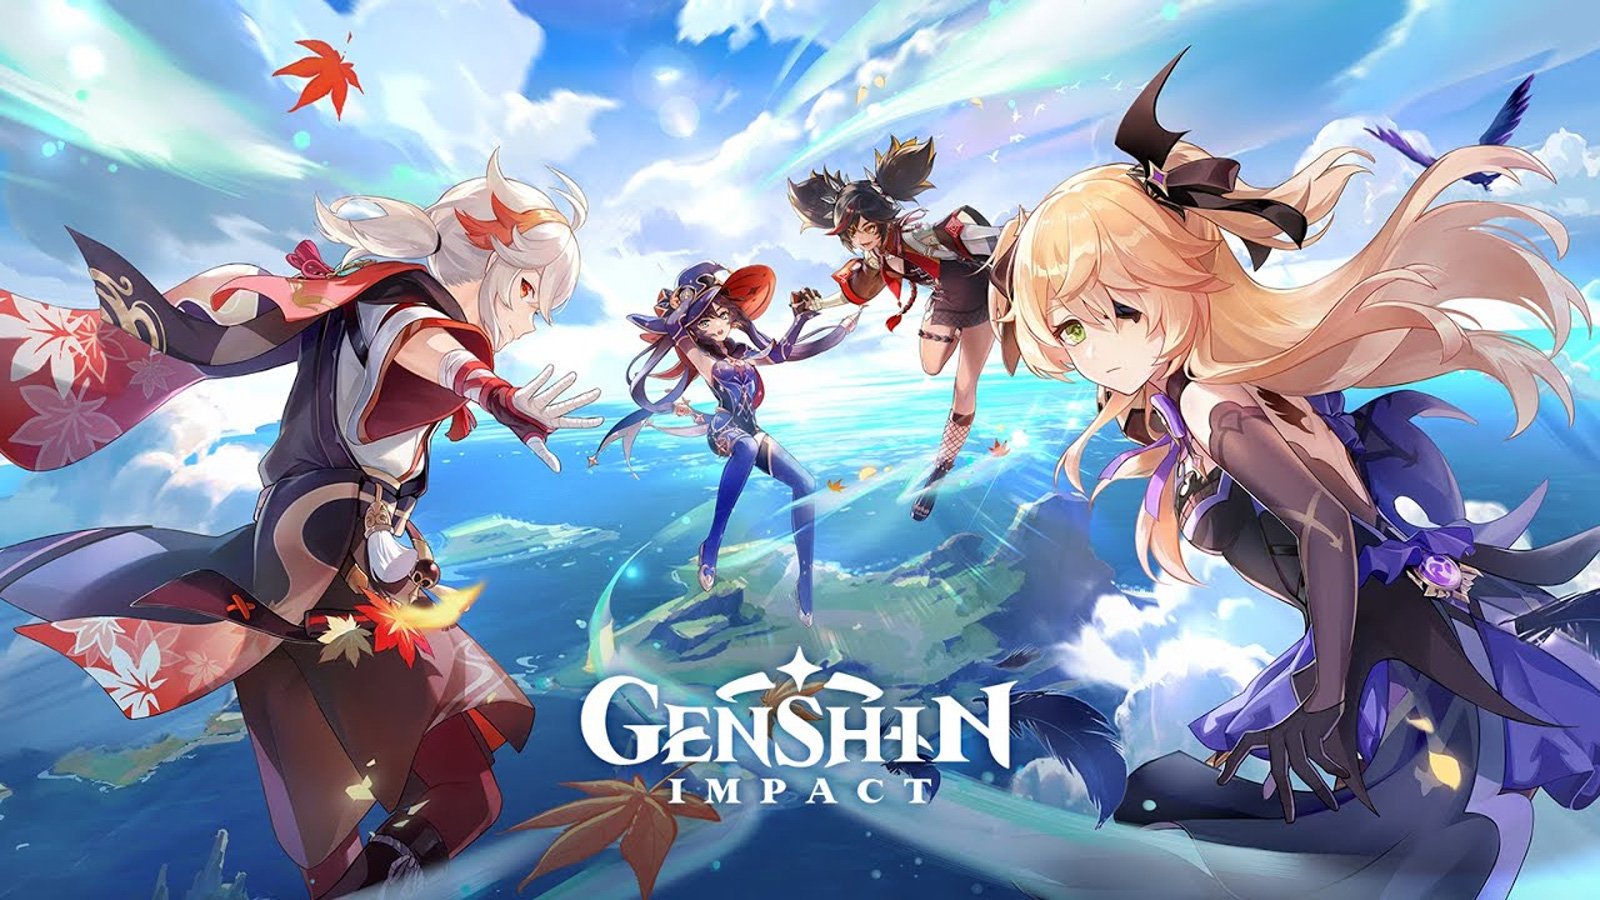 Genshin Impact
open world android games